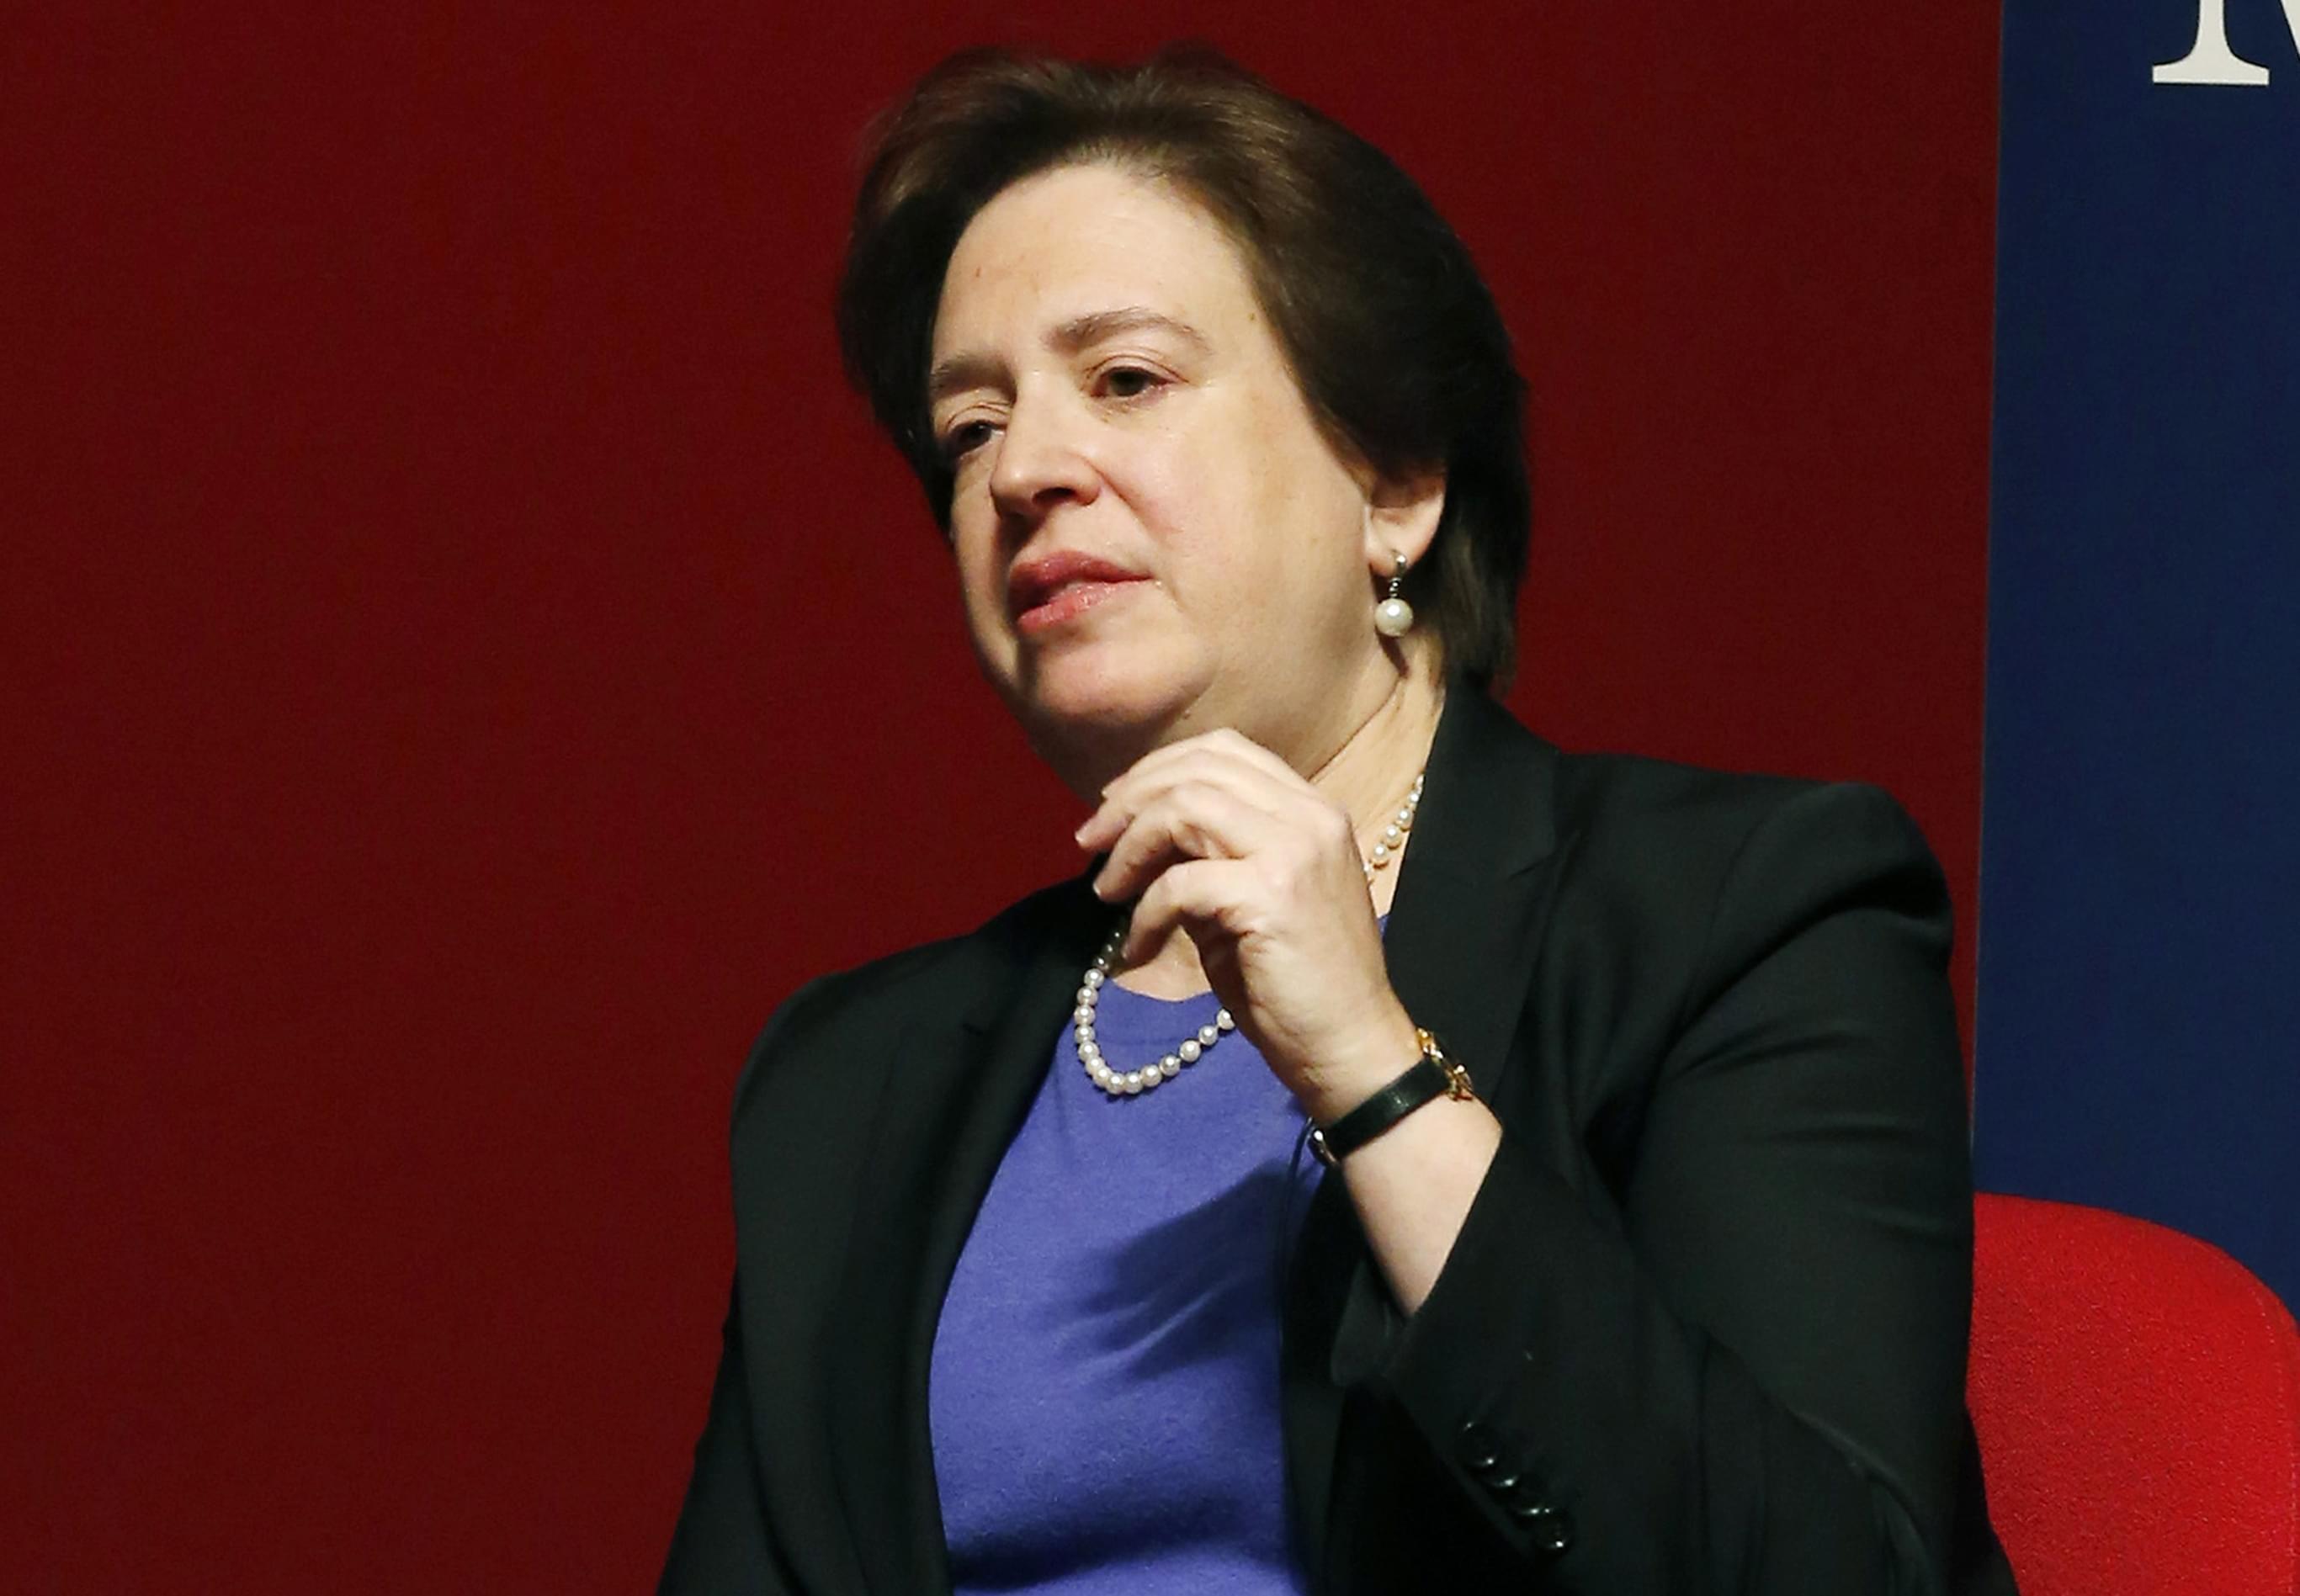 In this Dec. 15, 2014, file photo, U.S. Supreme Court Justice Elena Kagan at the University of Mississippi in Oxford, Miss.